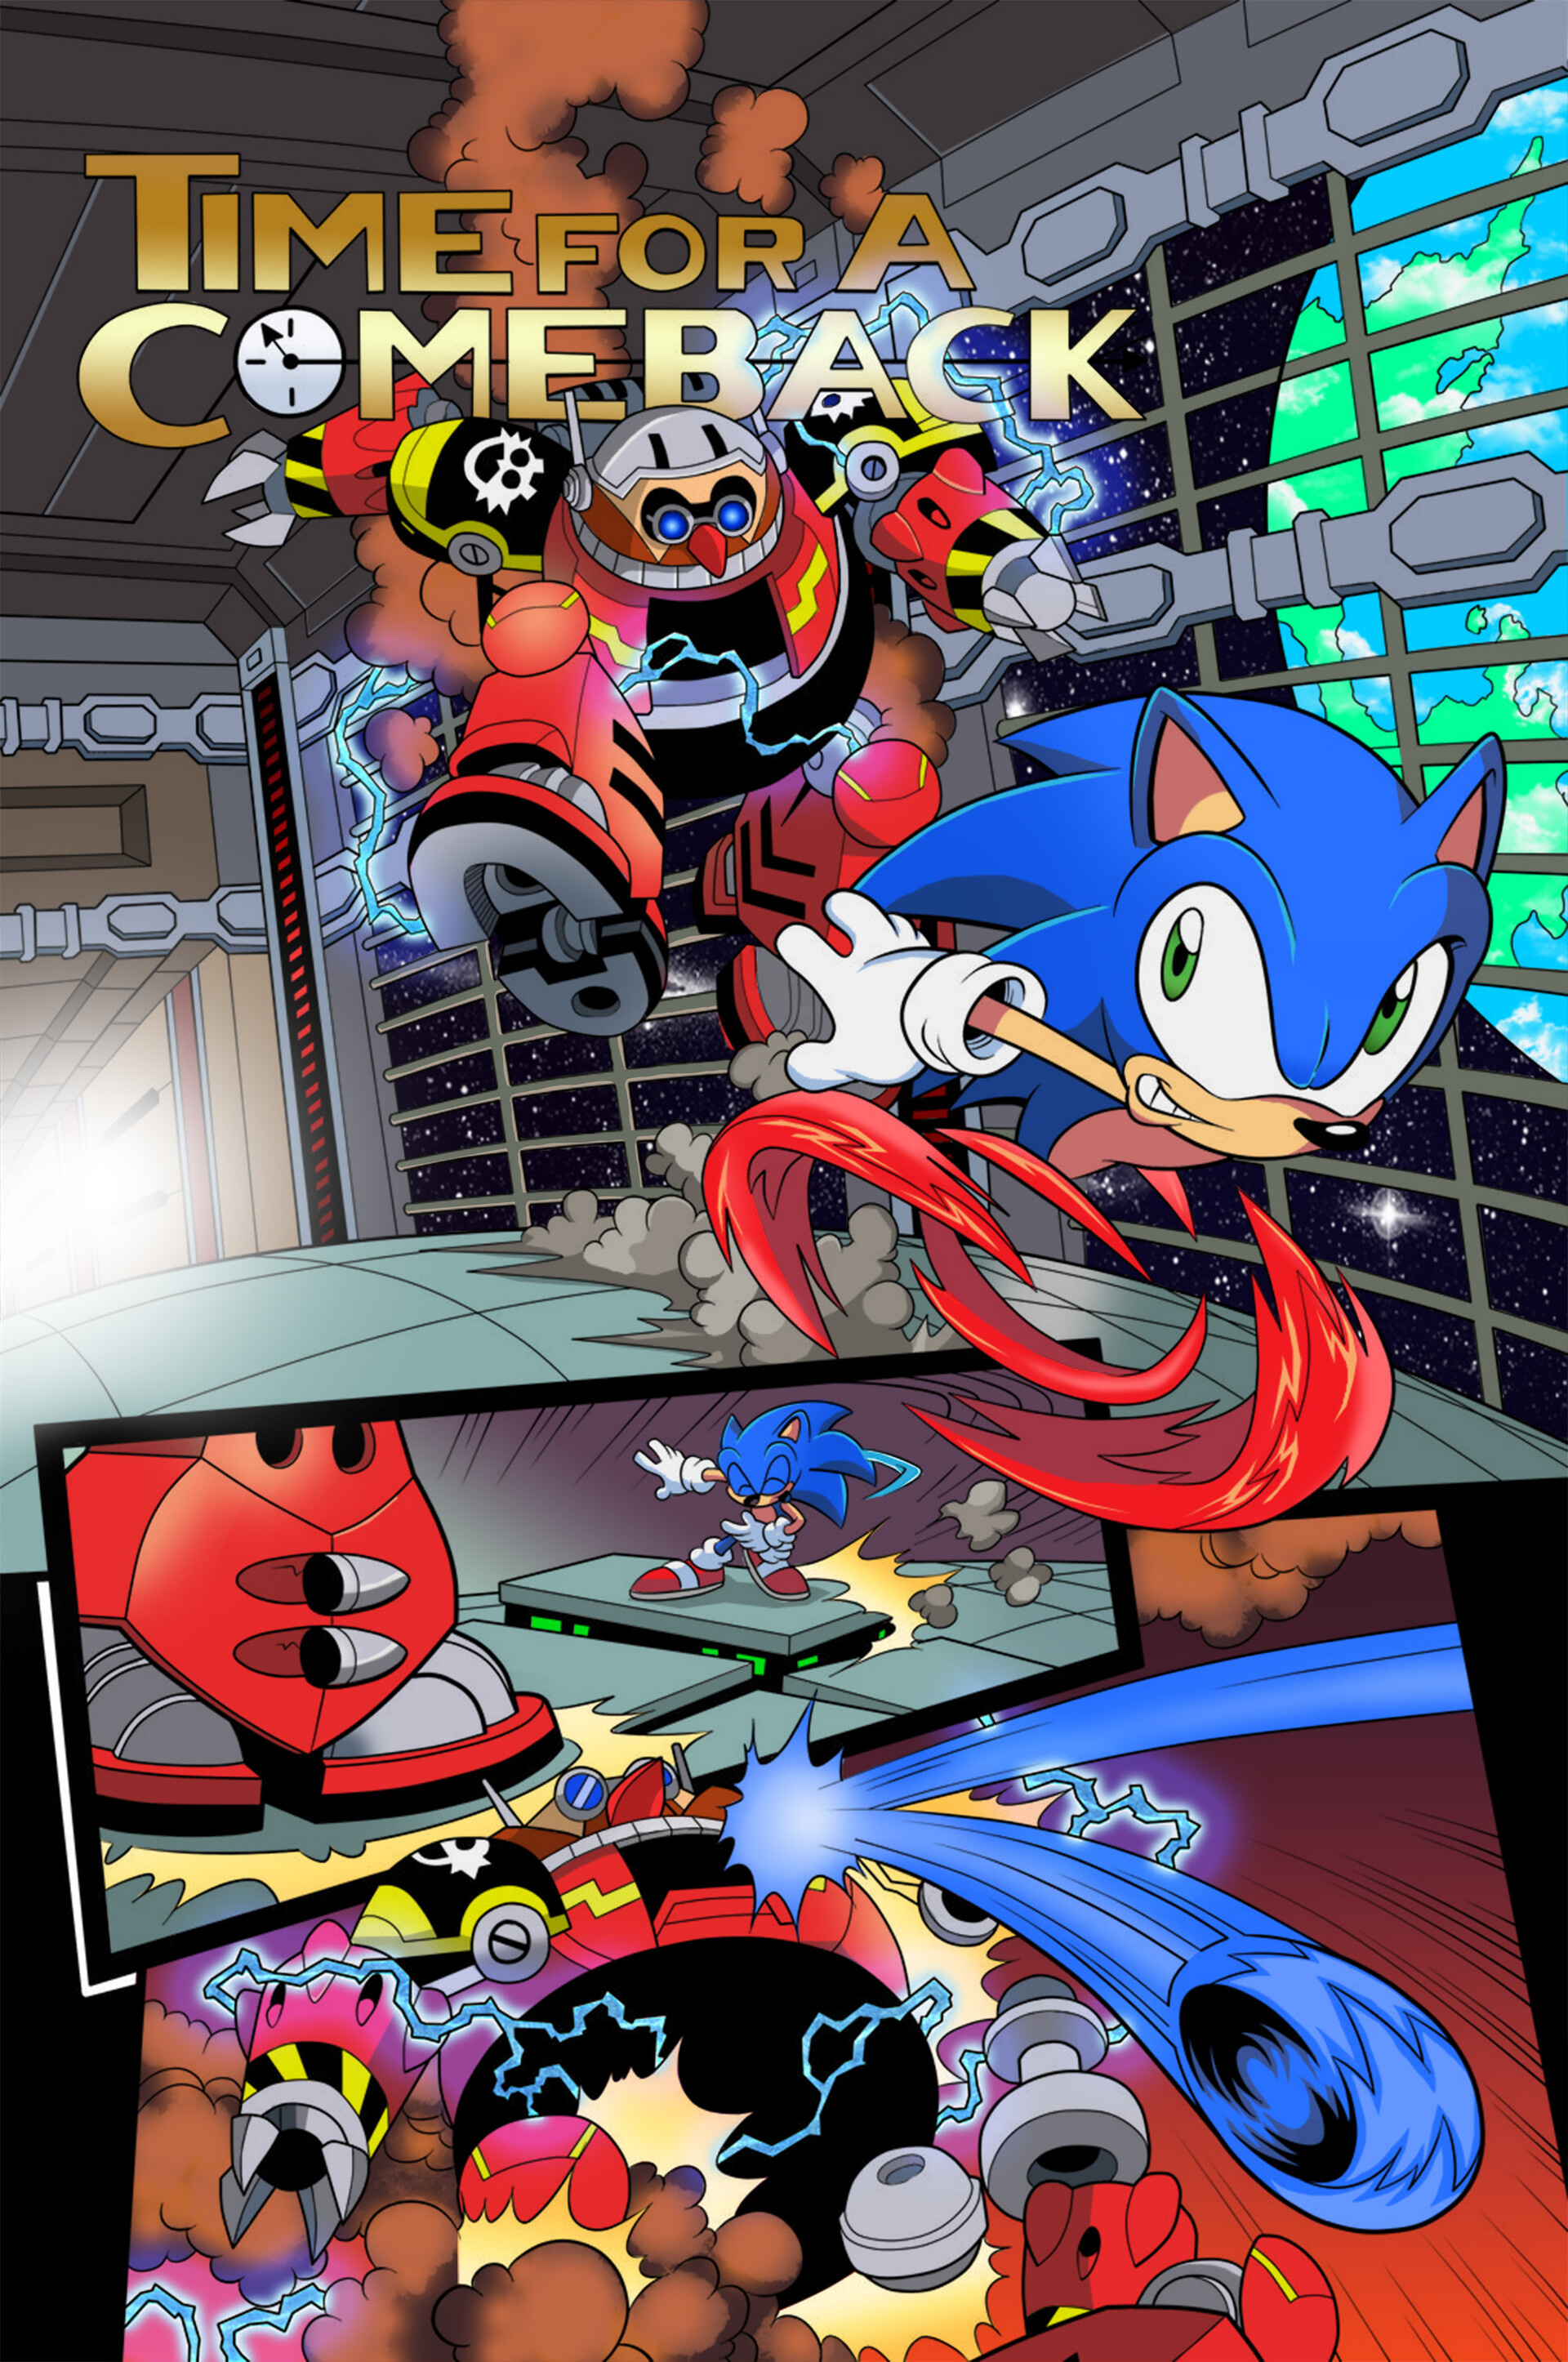 Sonic the Comic Issue 80, Sonic Wiki Zone